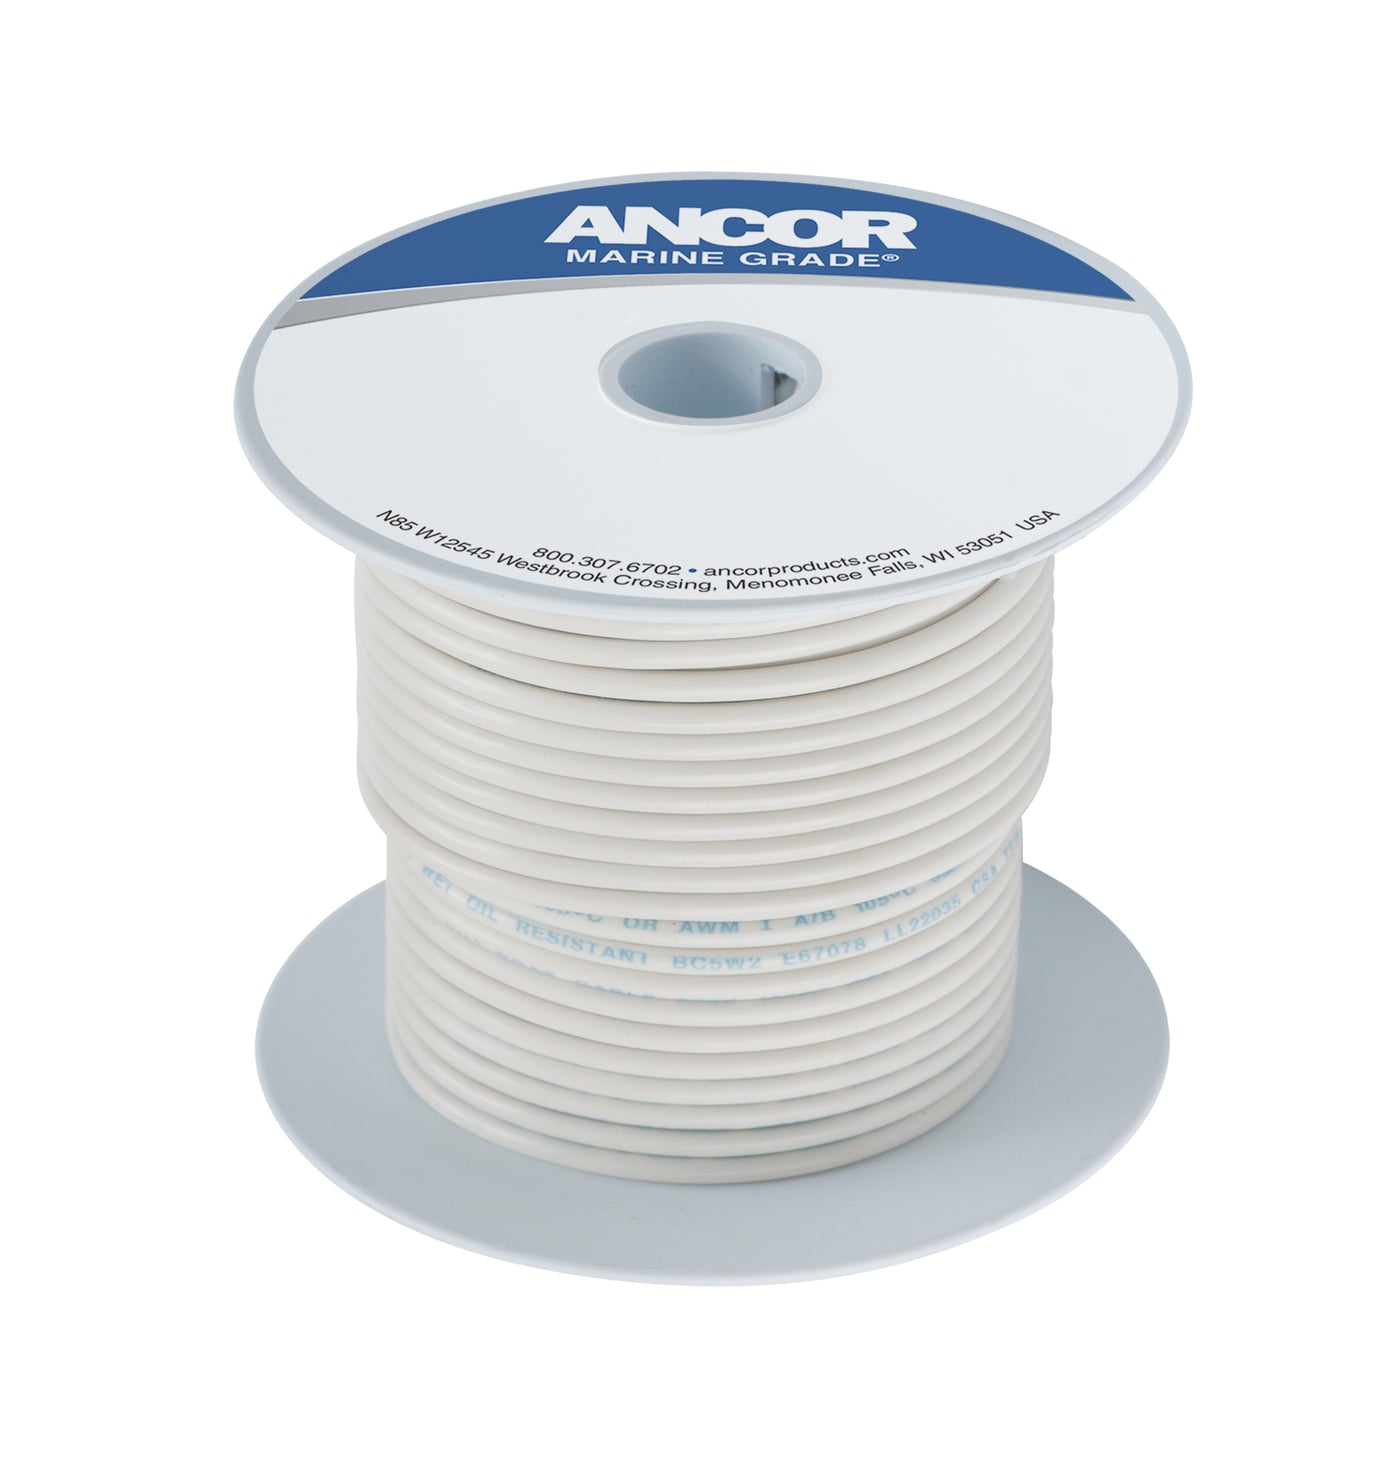 Ancor 111710 Tinned Copper Wire, 8 AWG (8mm²), White - 100ft